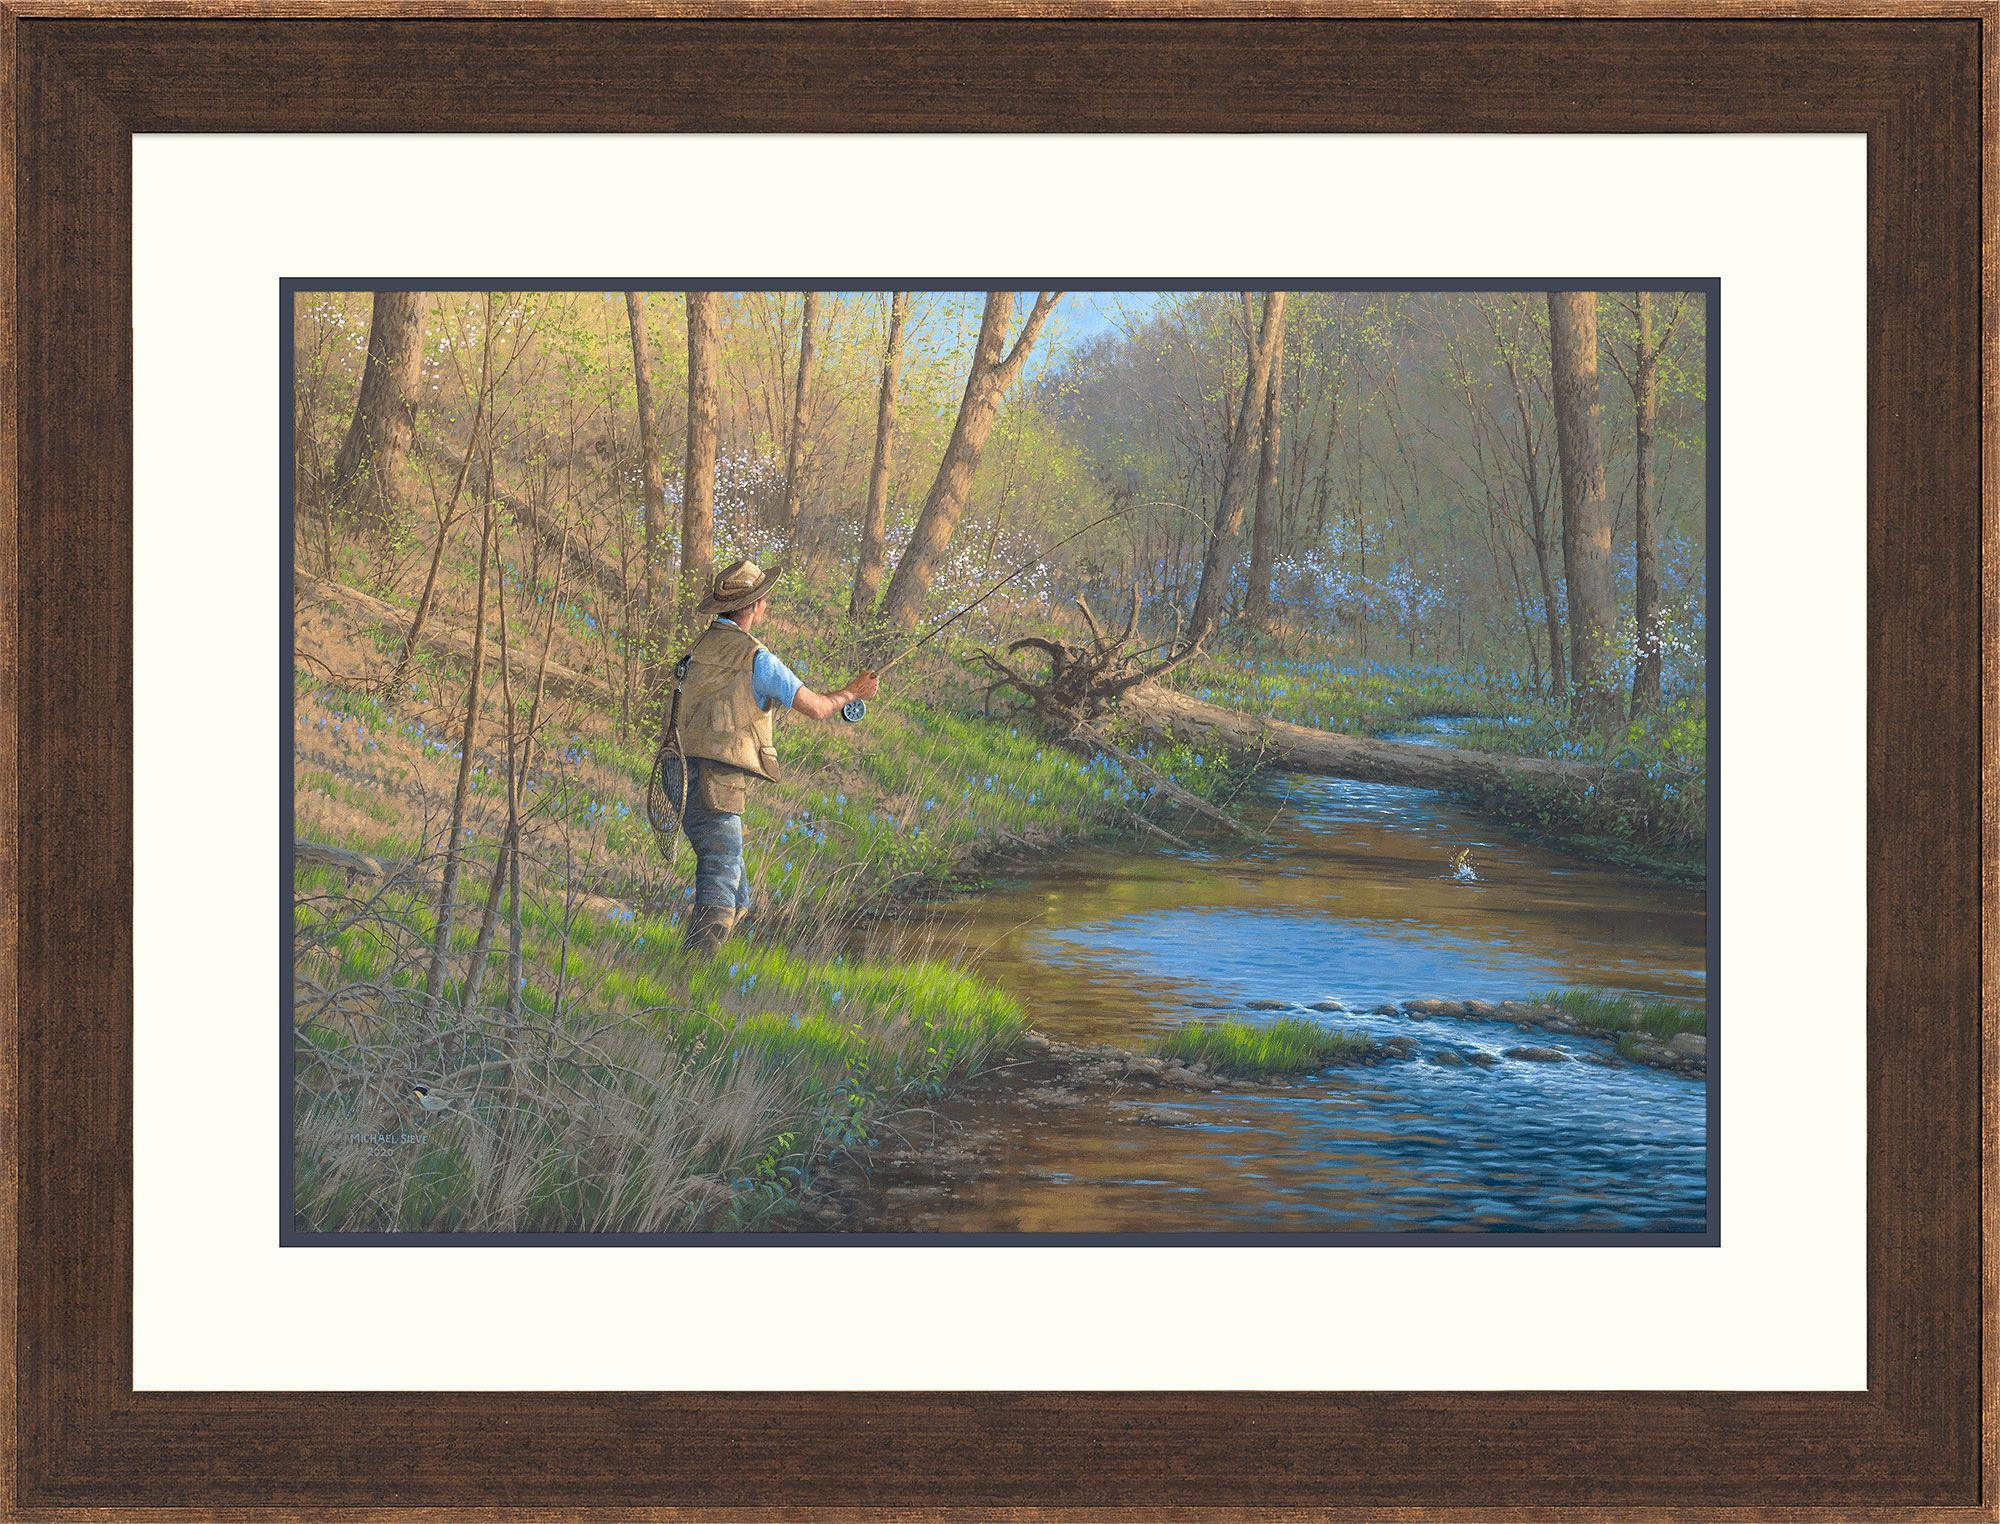 On the Fly Framed Limited Edition Print - Wild Wings